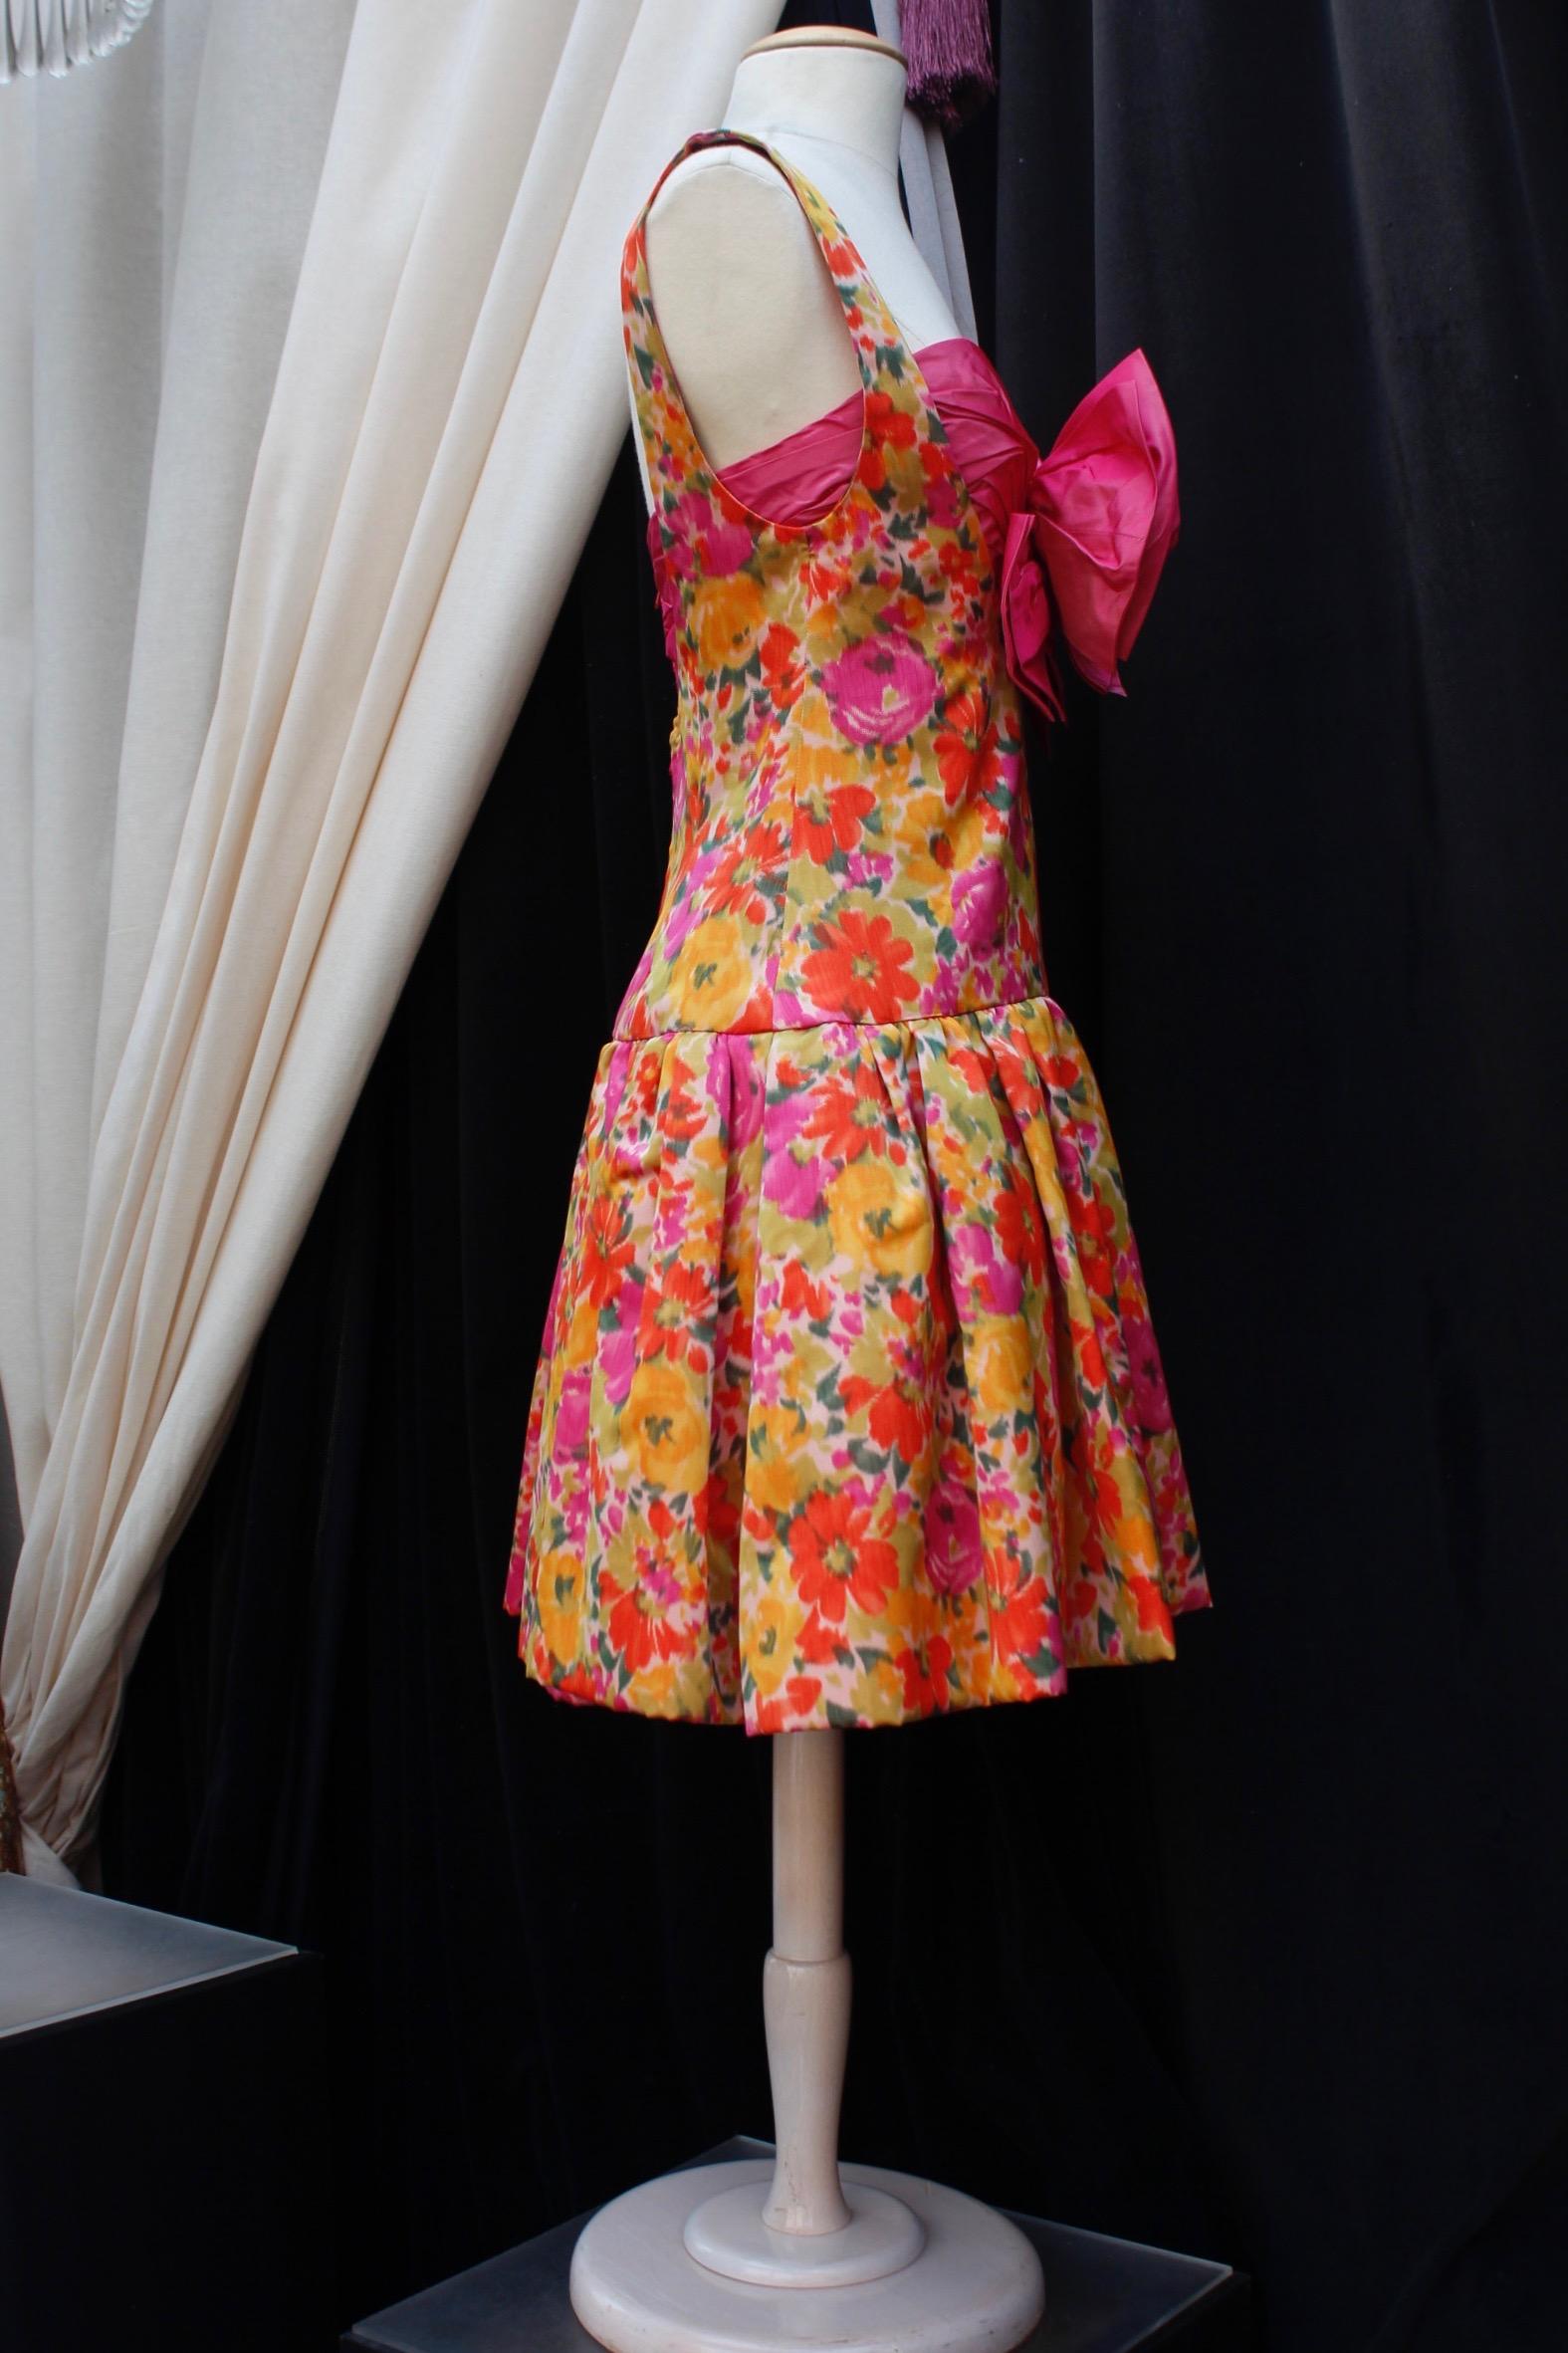 Pink Nina Ricci lovely skater dress with floral pattern, large bow and star For Sale